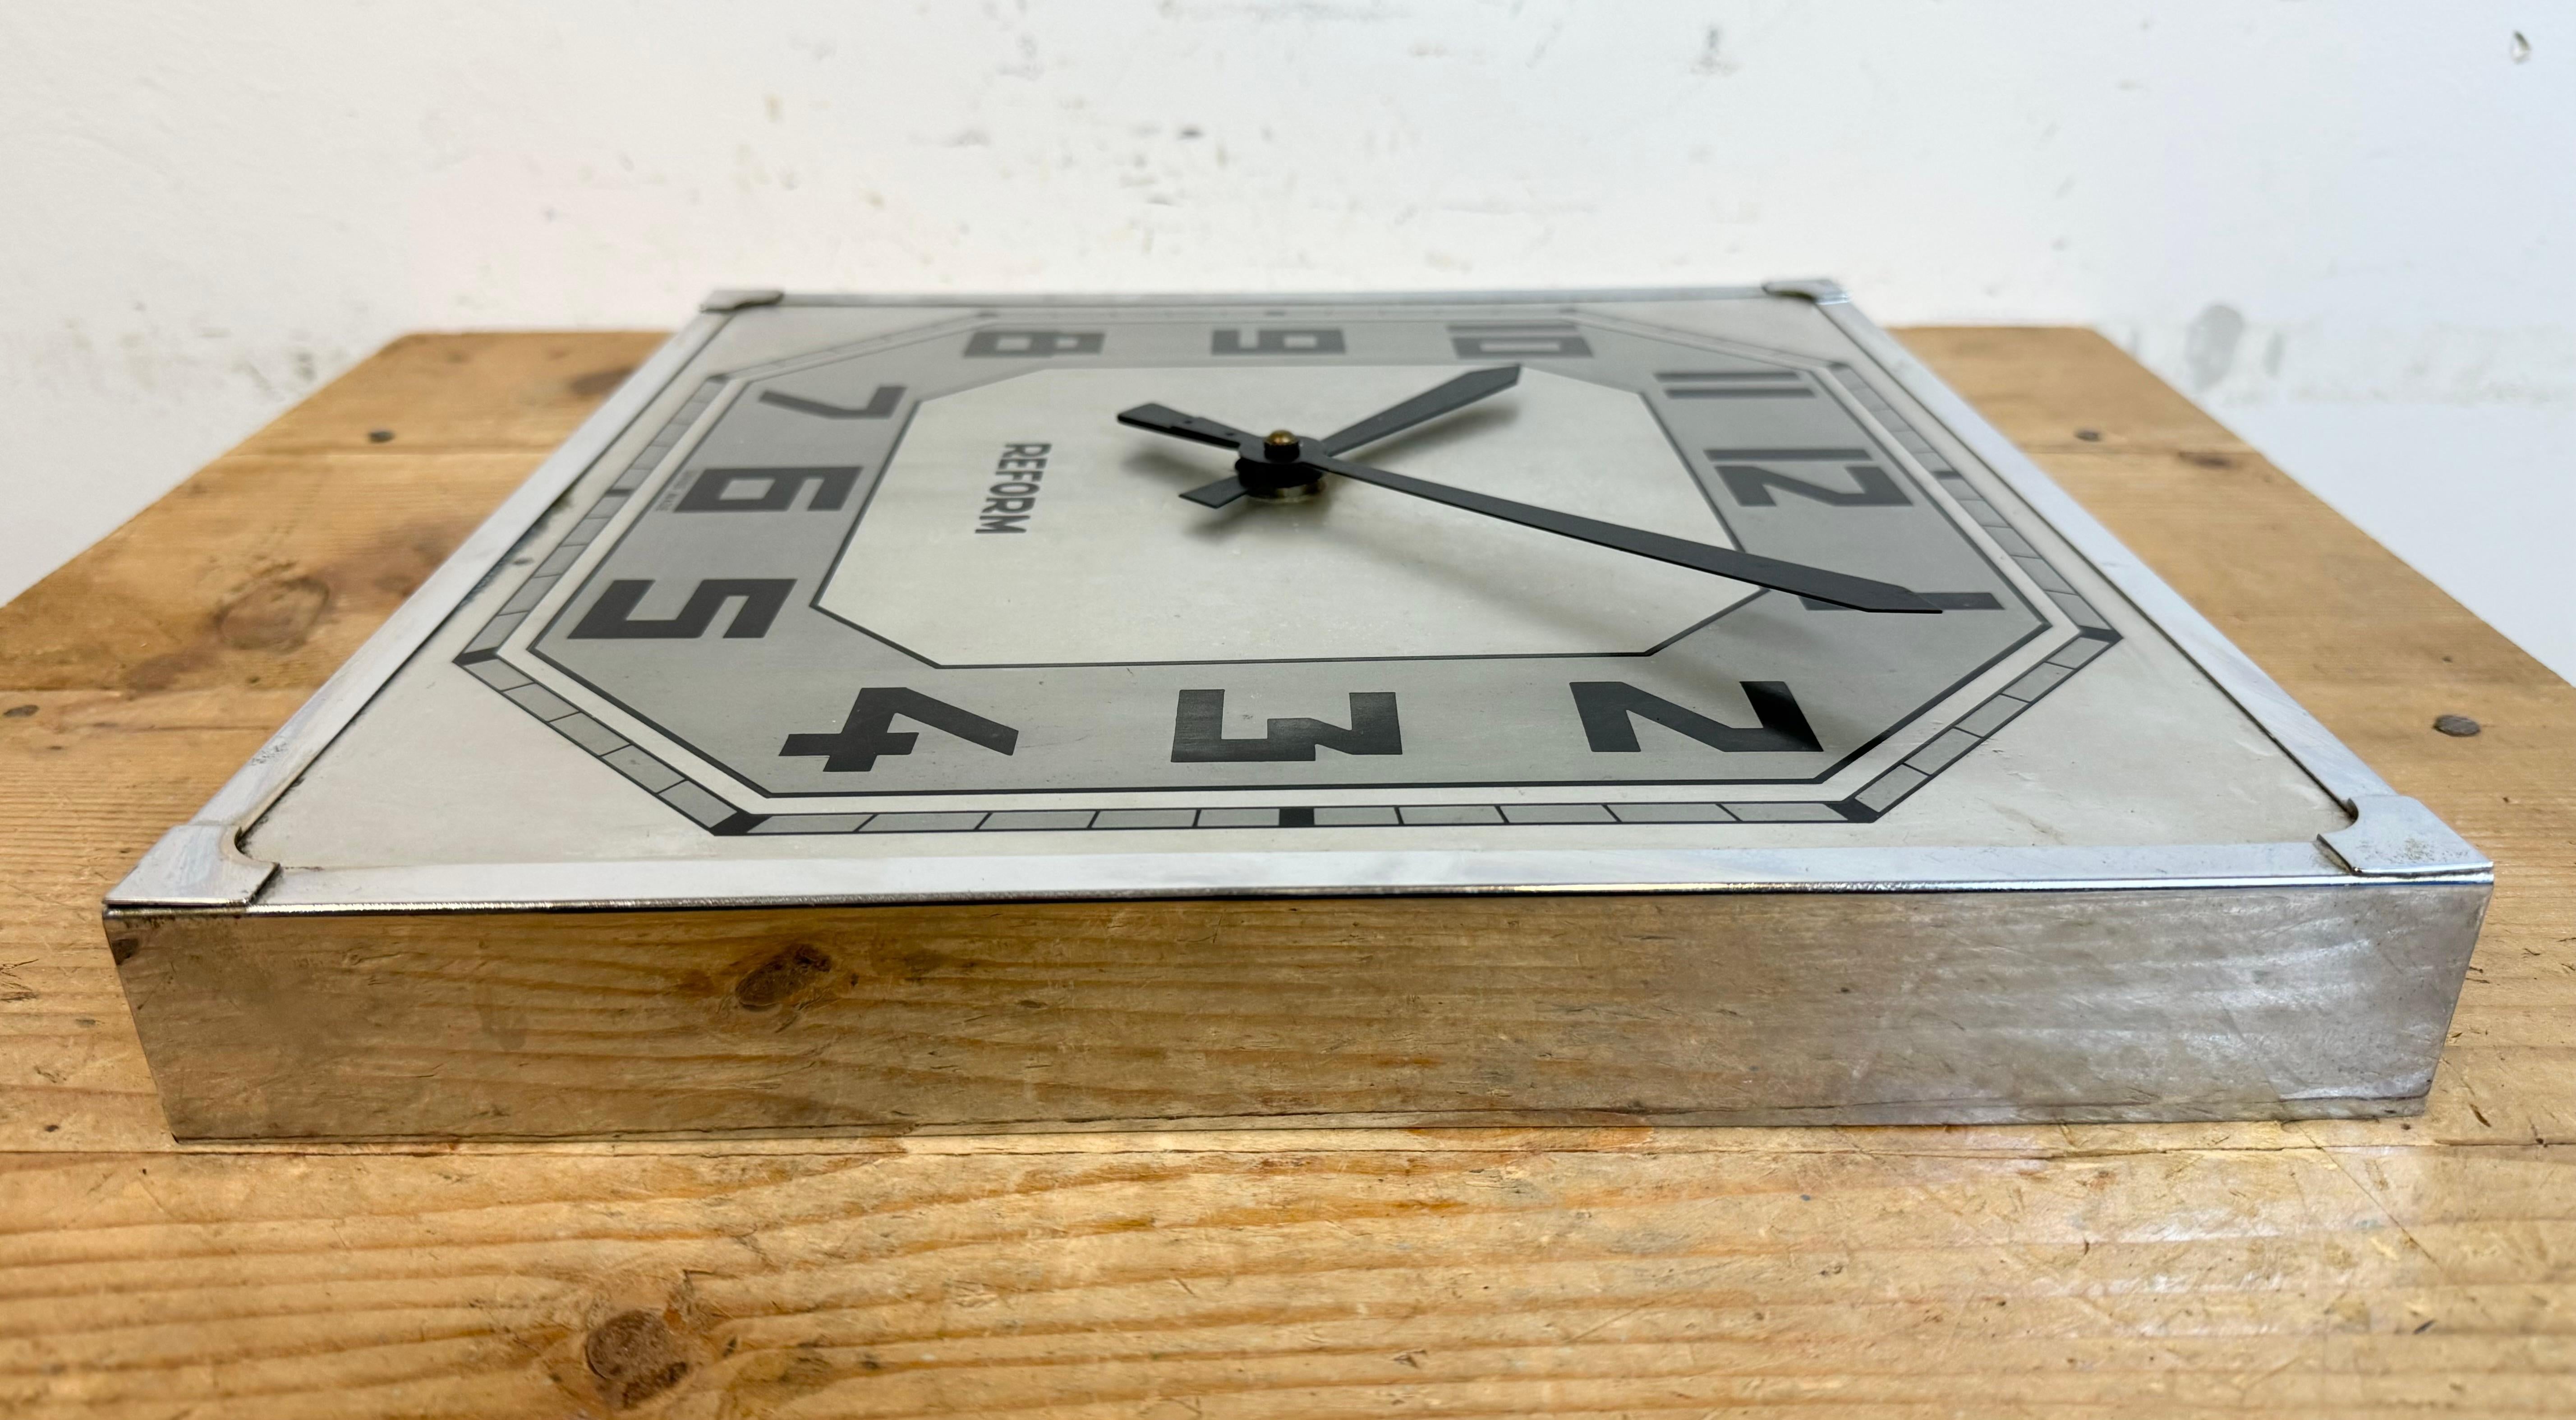 Vintage Swiss Square Wall Clock from Reform, 1950s For Sale 4